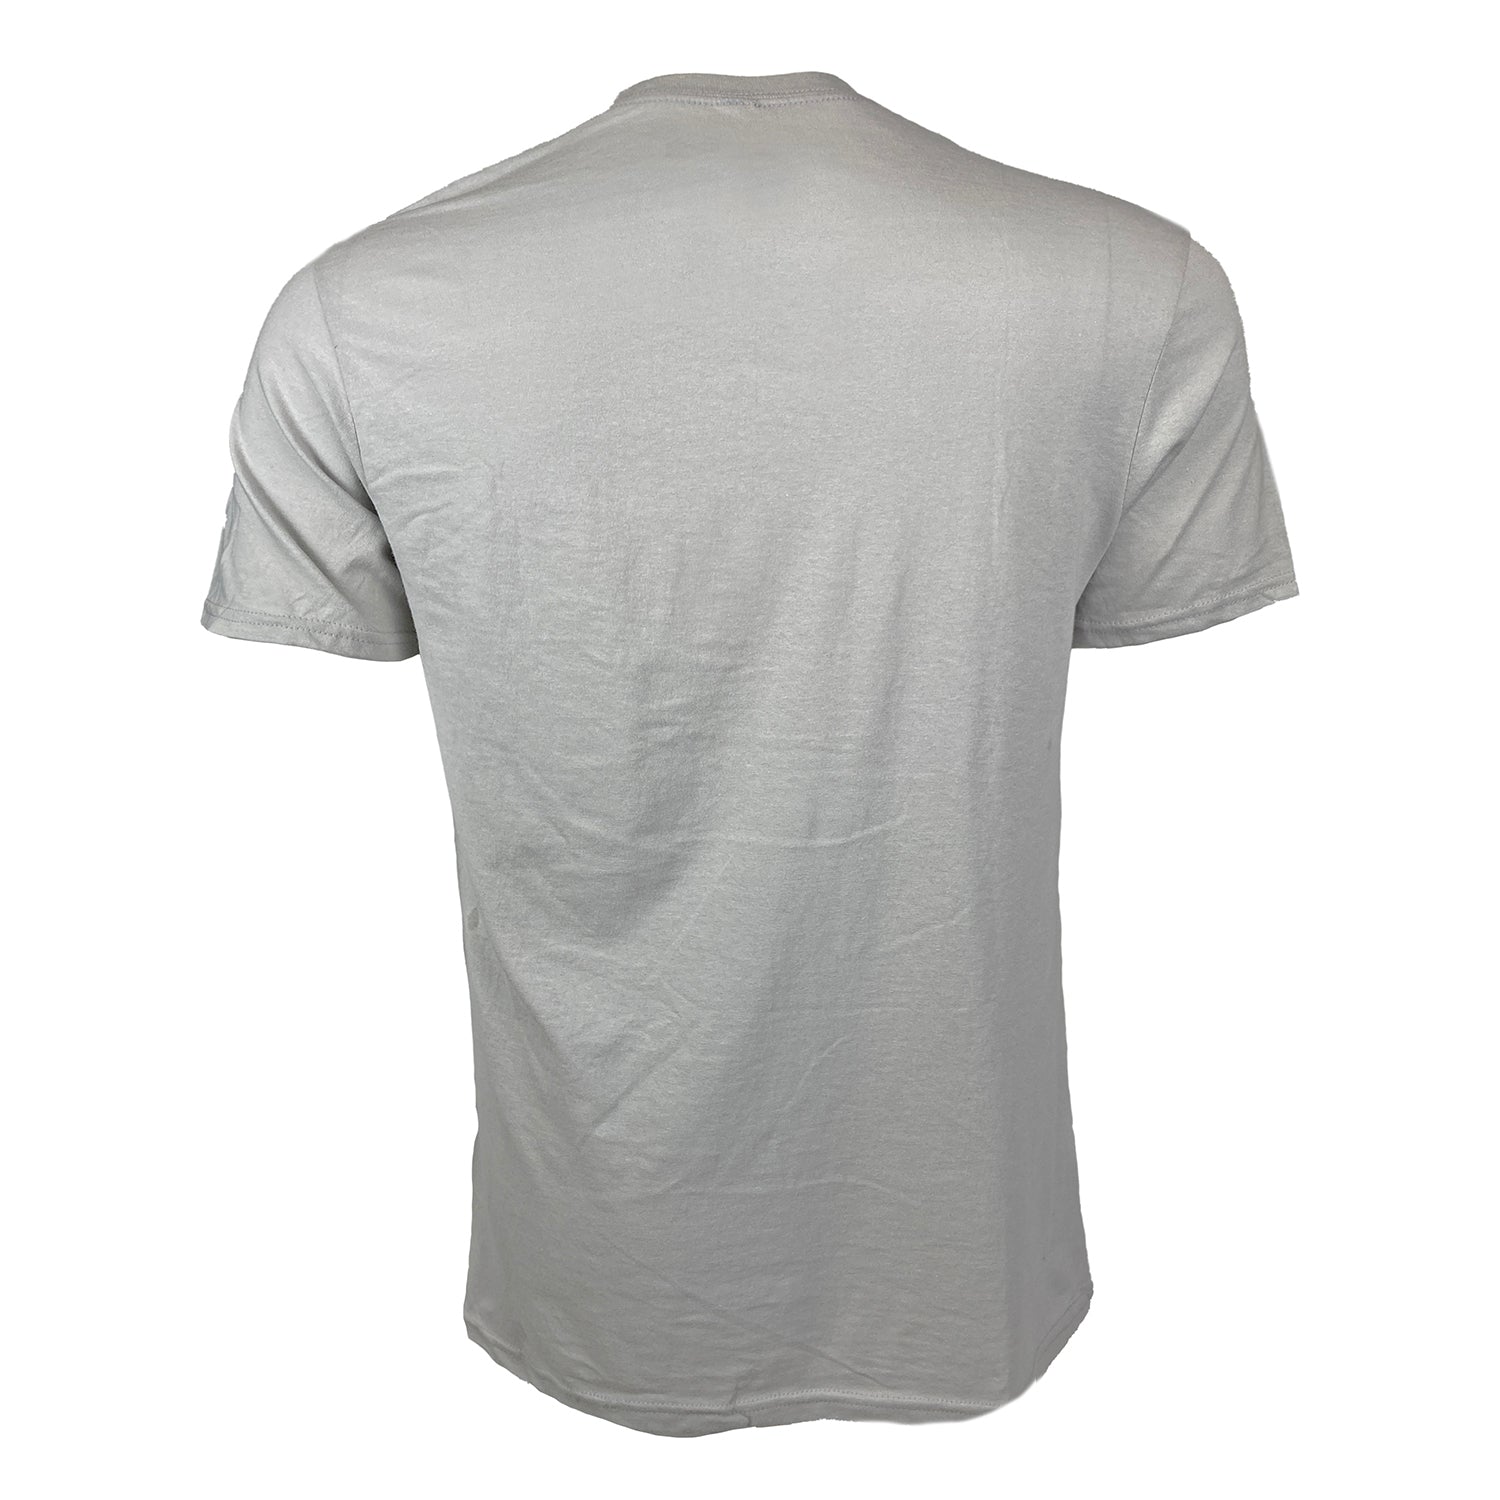 Gray tee shown from the rear.